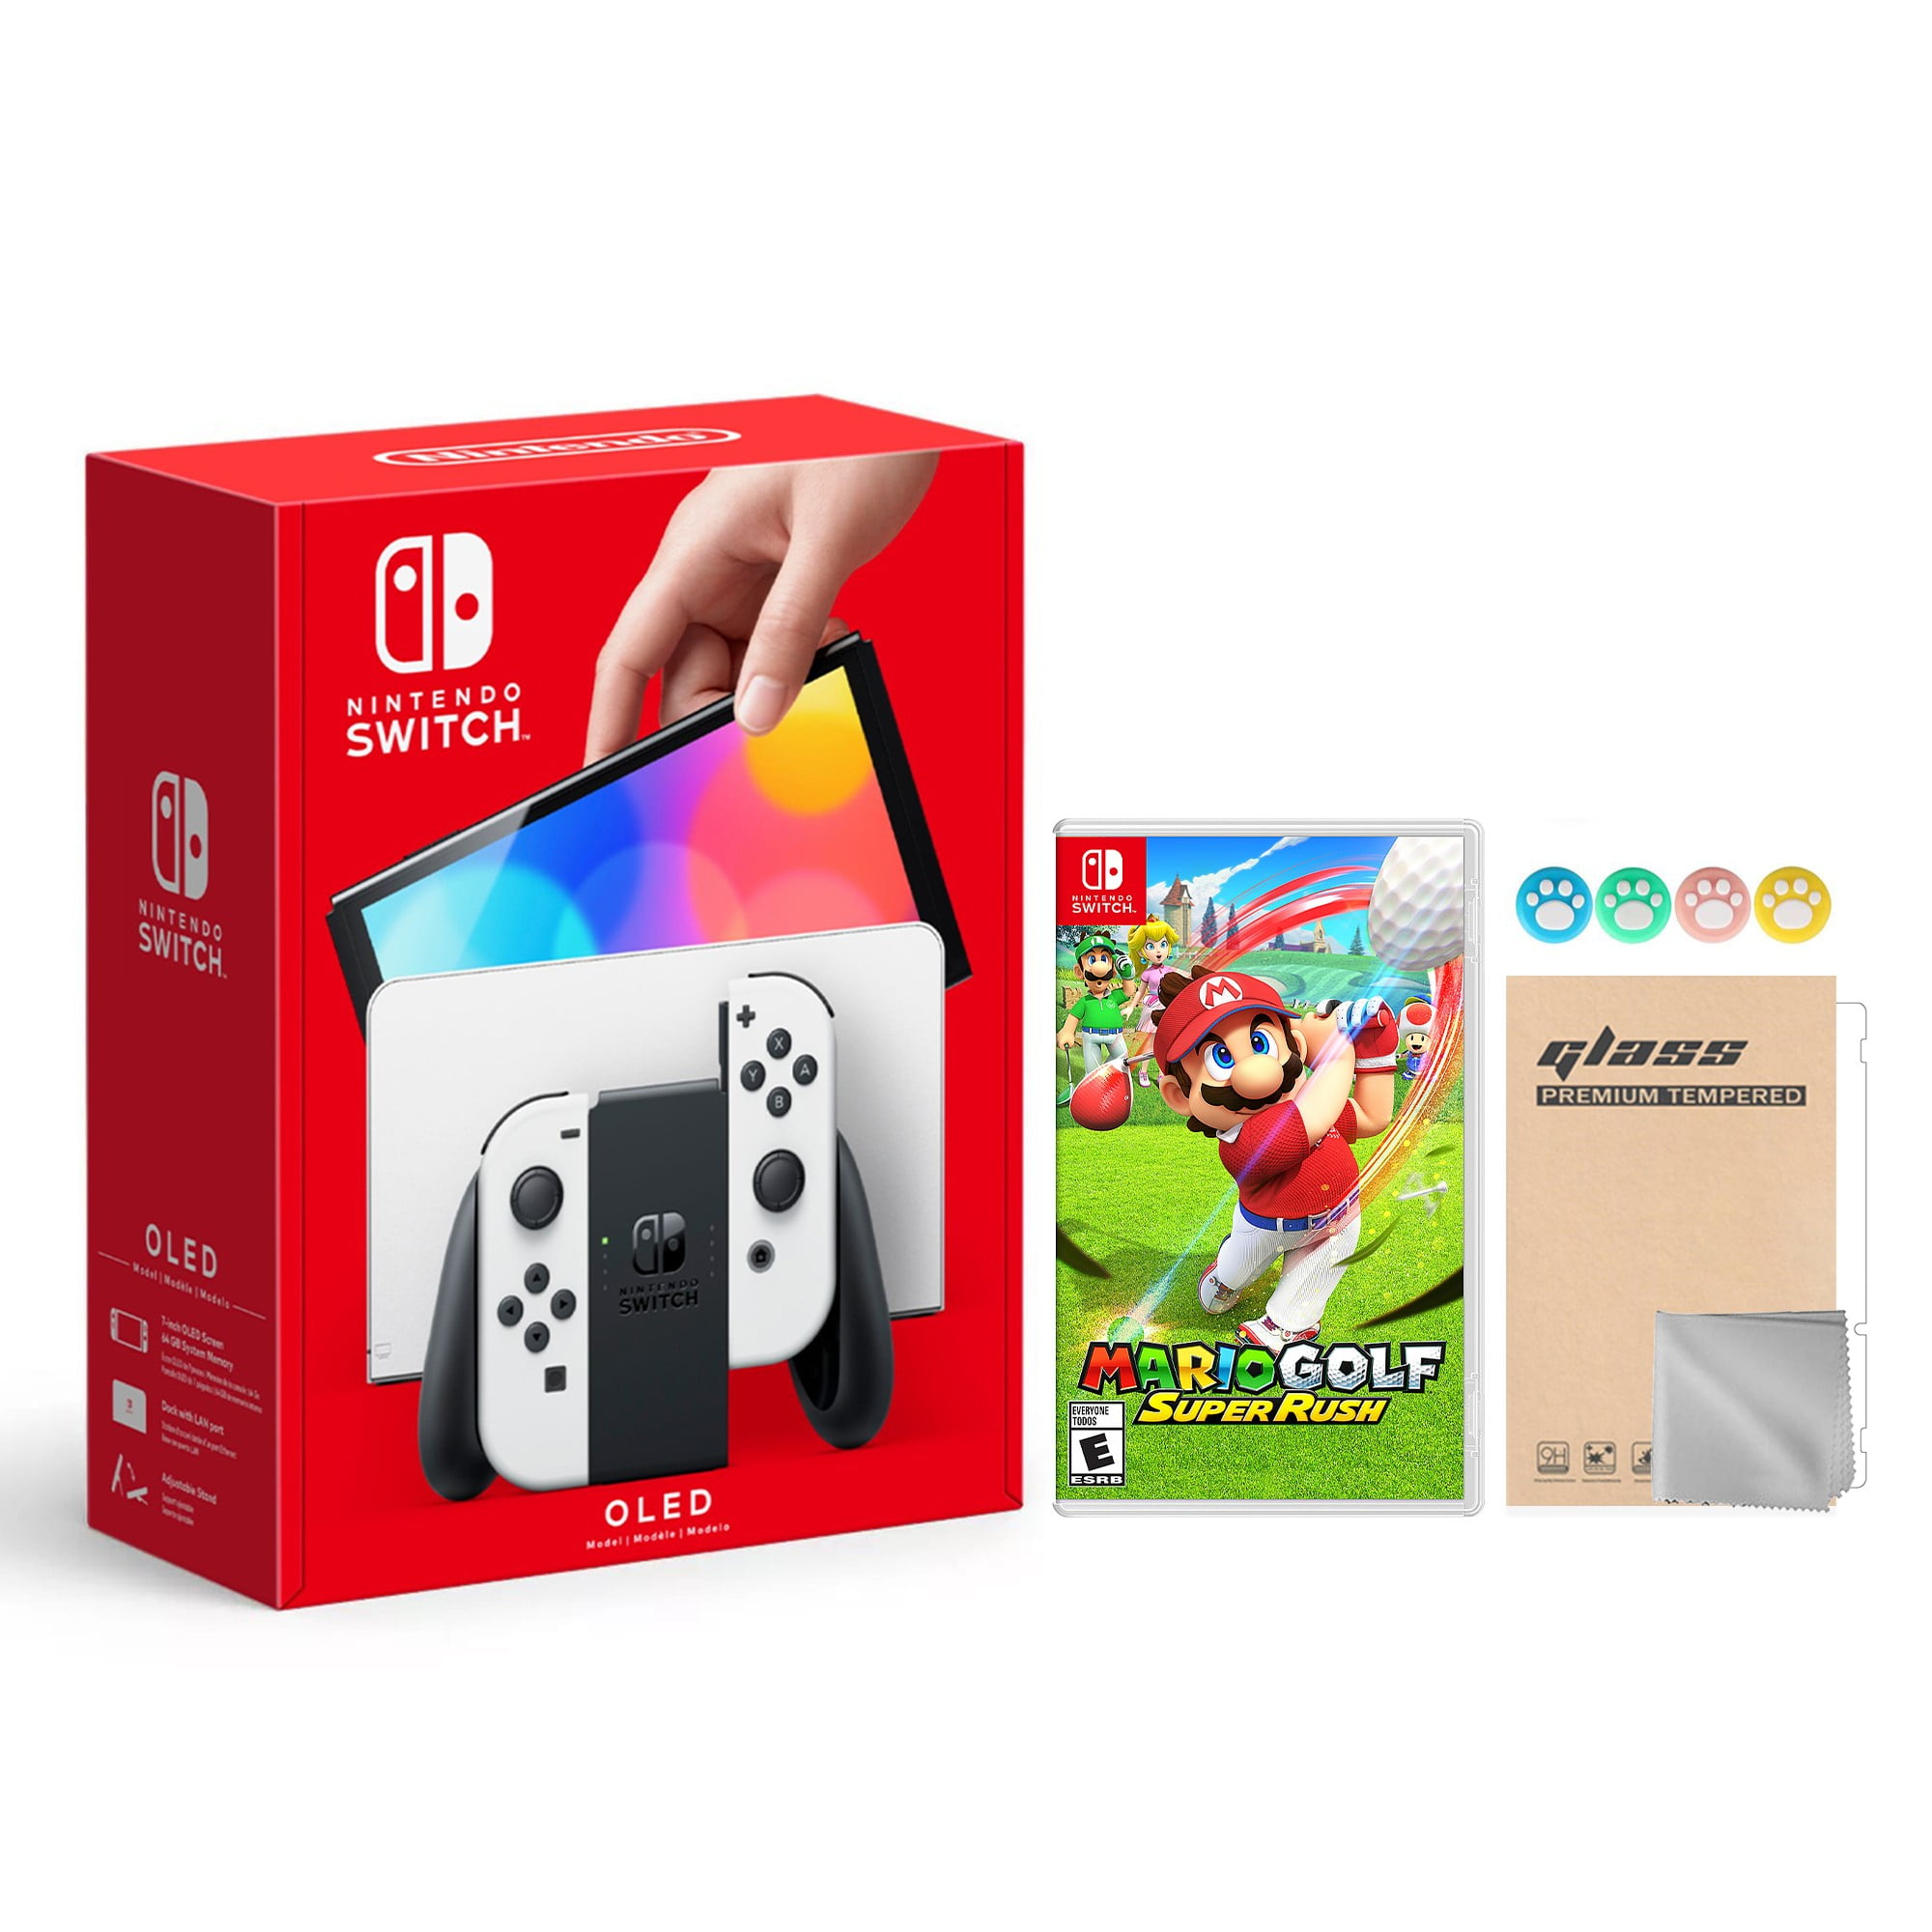 Nintendo Switch of Screen JP Free Skyward HD Zelda: Model White And Region Joy 64GB HD Improved & - Legend The Sword Con Console Mytrix OLED LAN-Port Dock Accessories - with Version